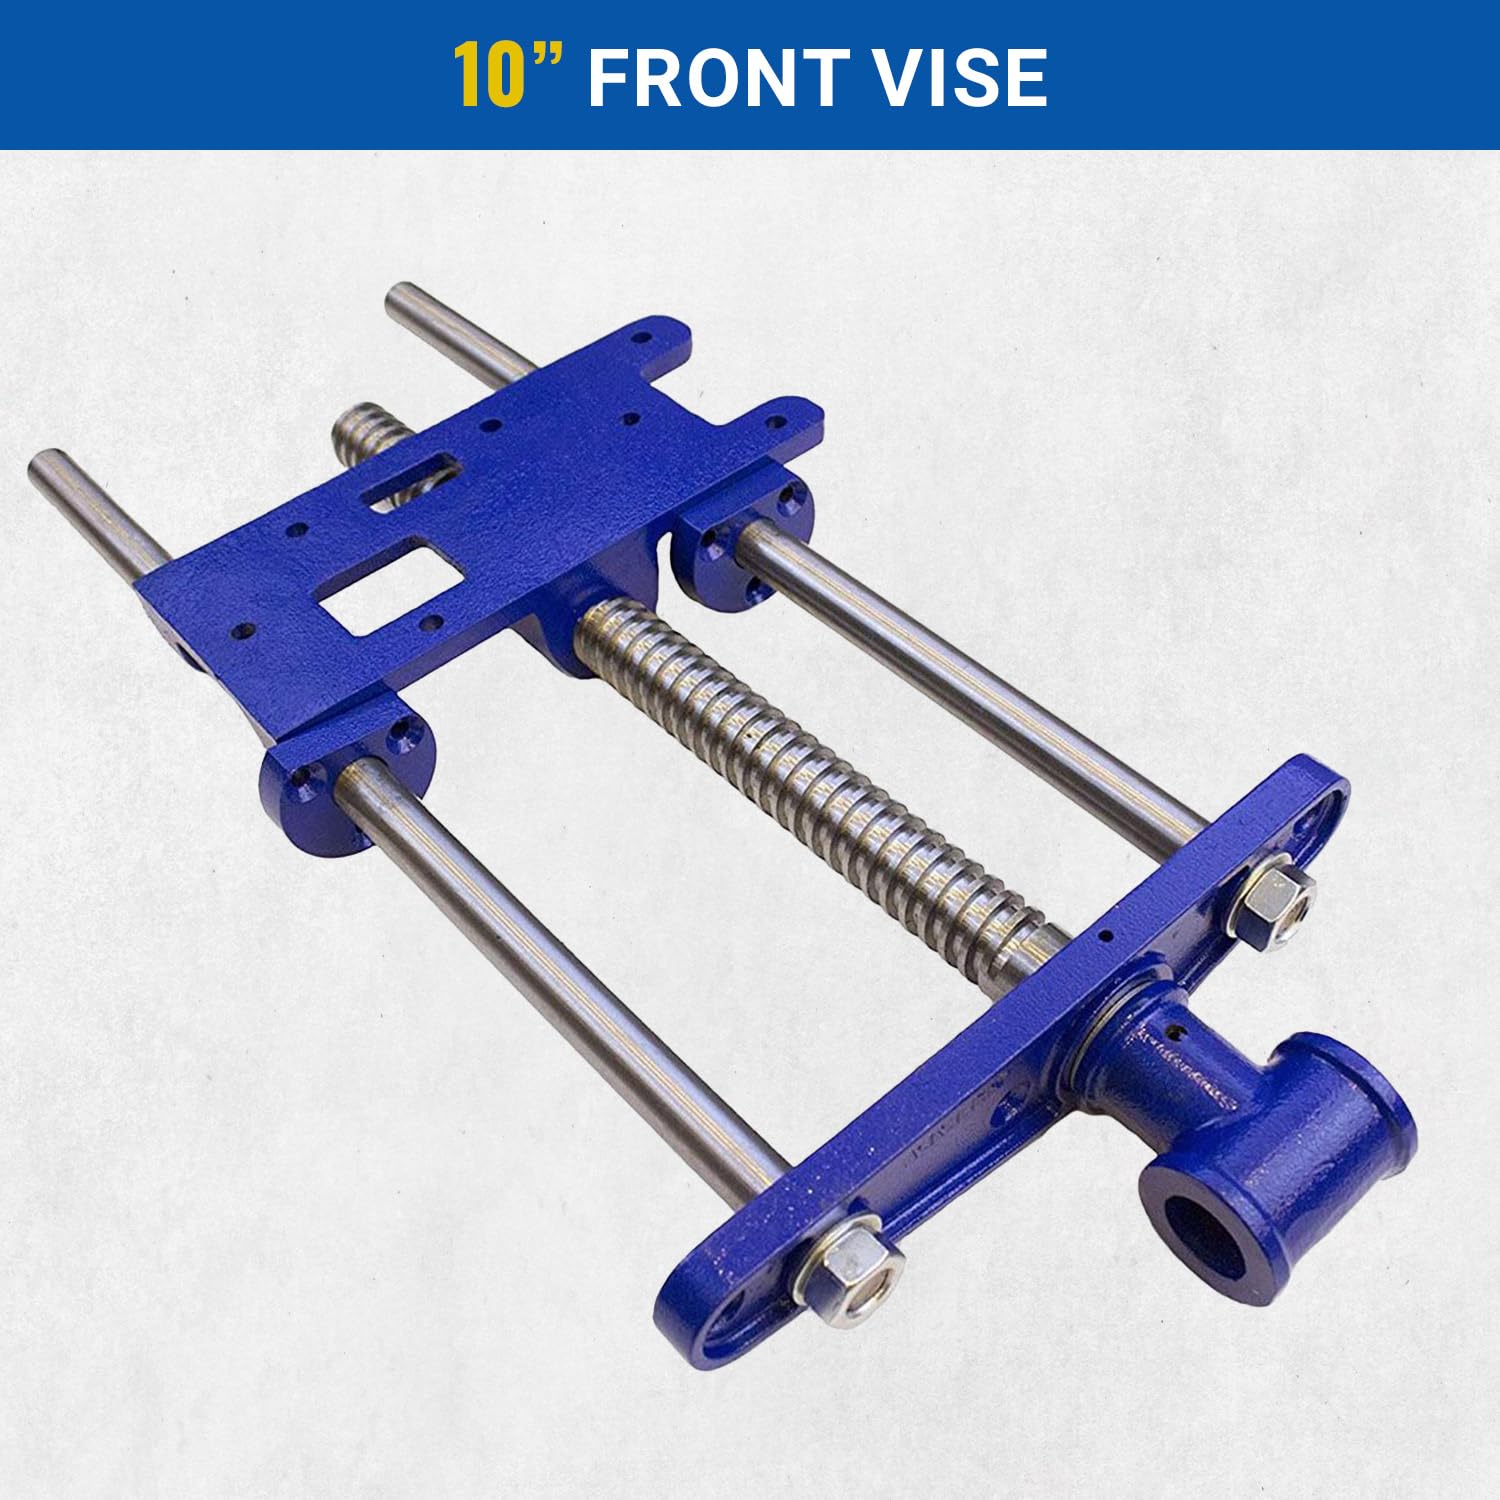 Yost Vises F10WW Woodworker’s Vise Review